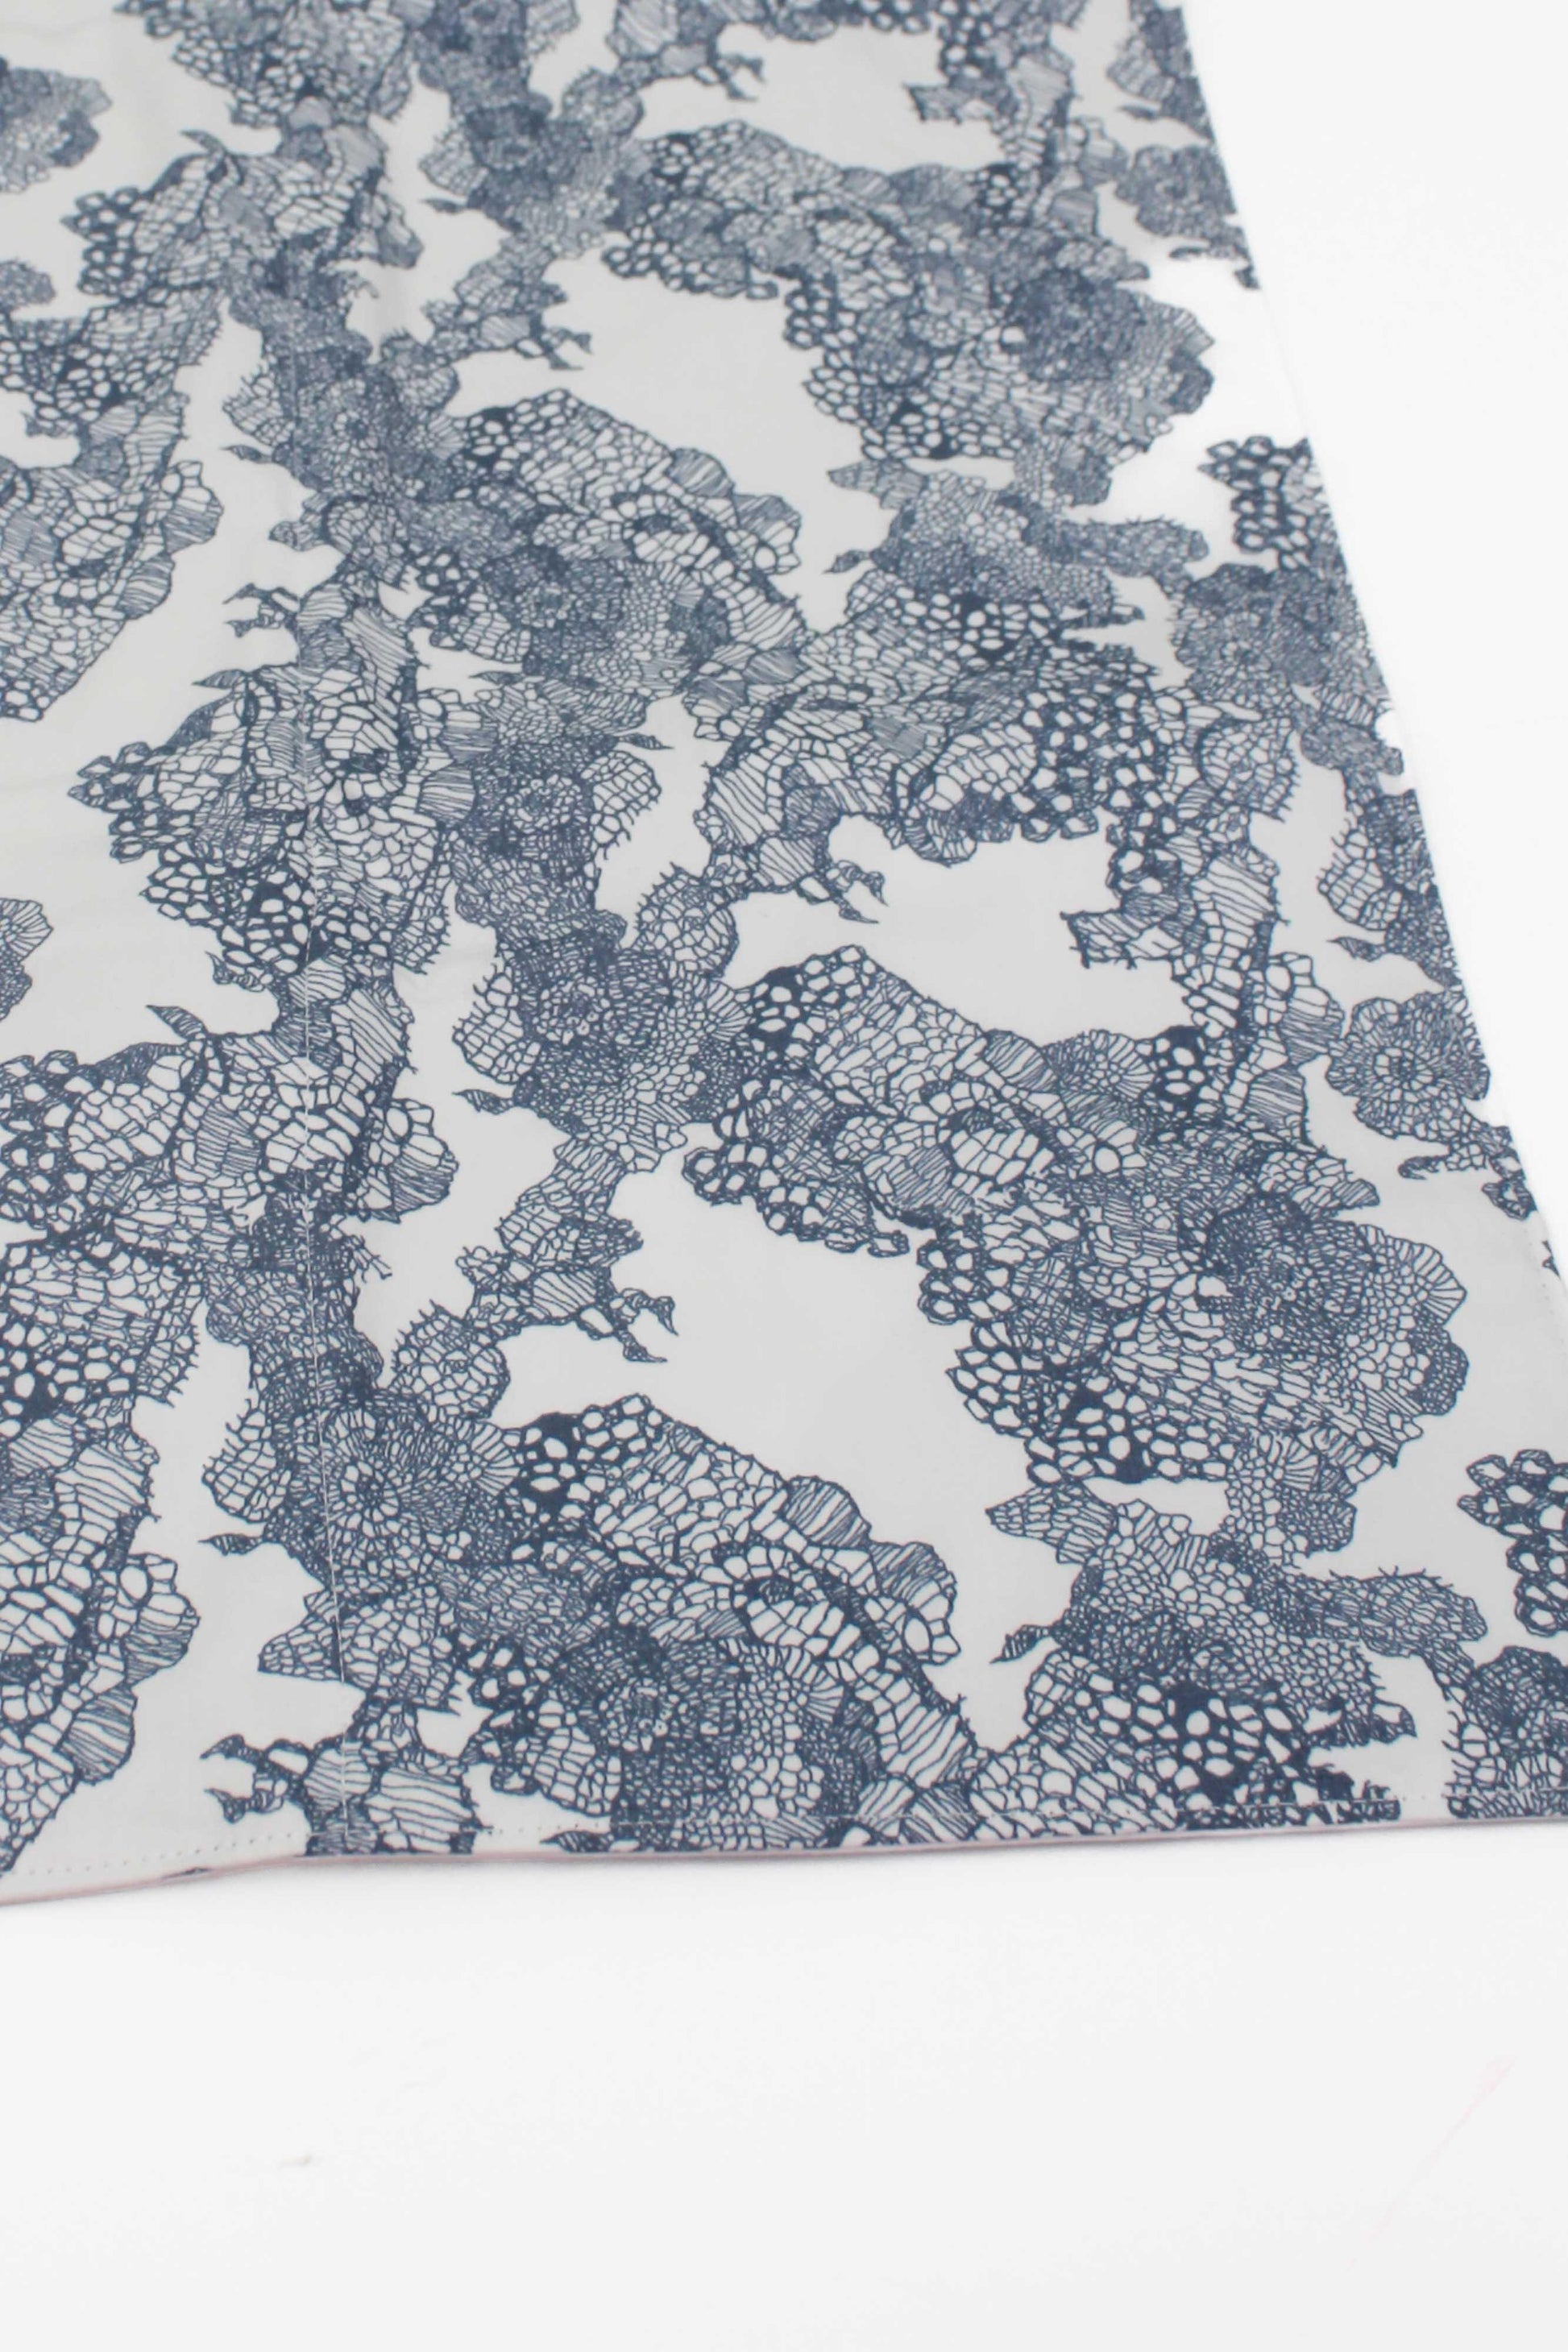 Lace Baby Changing Mat READY TO SHIP - Modern Makerie